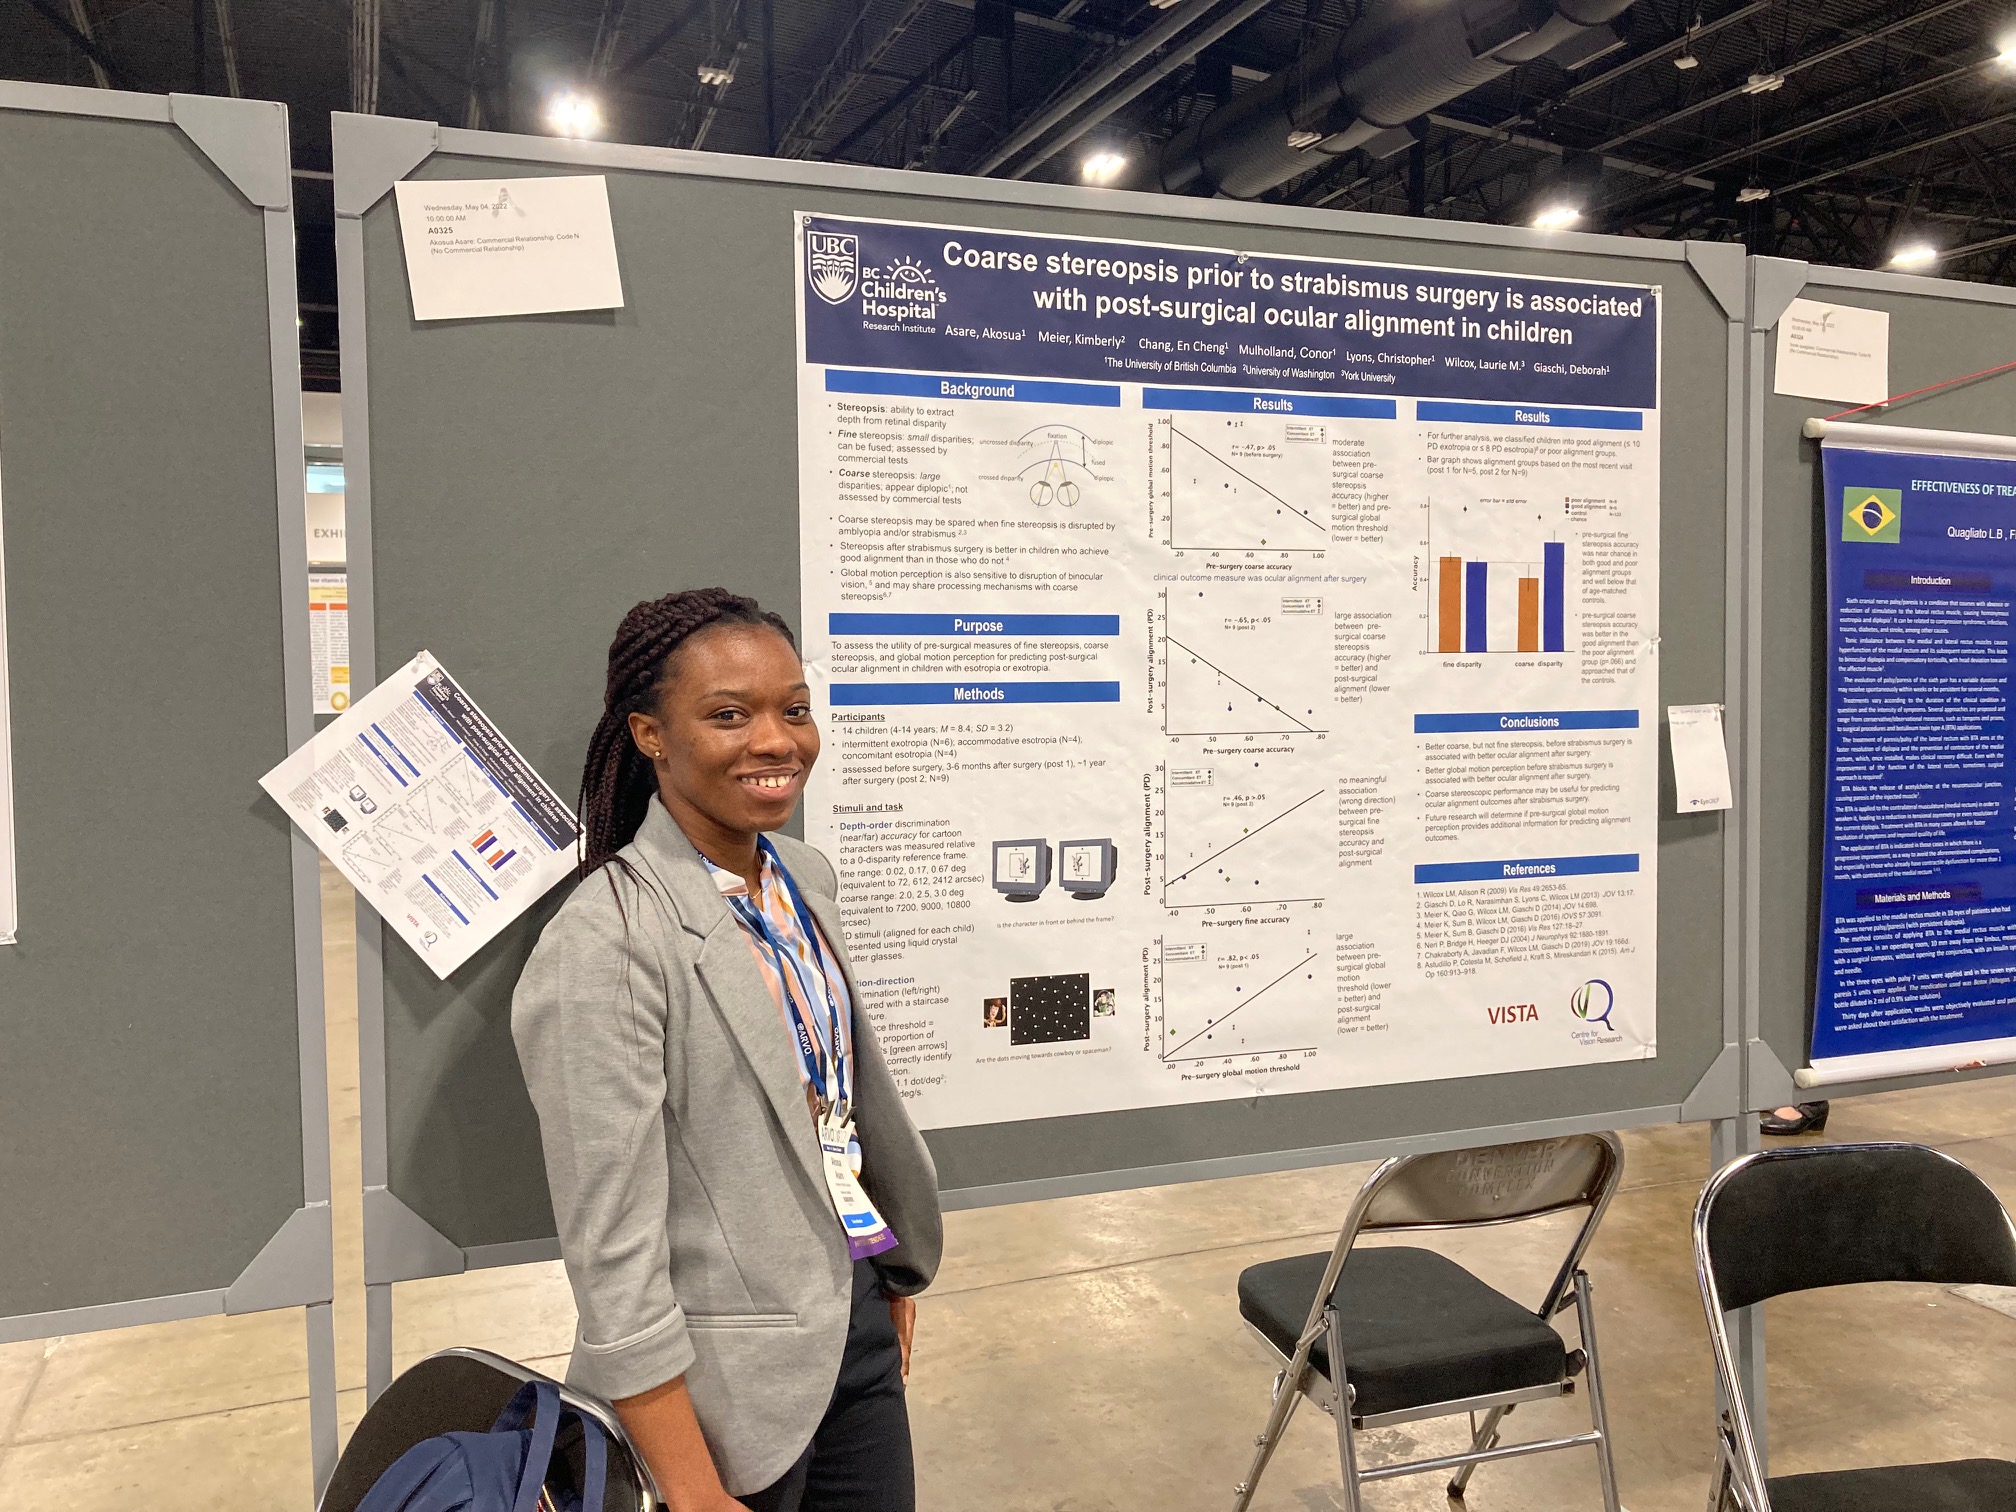 Akosua (Ph.D. student) at the Association for Research in Vision and Ophthalmology (ARVO, 2022)